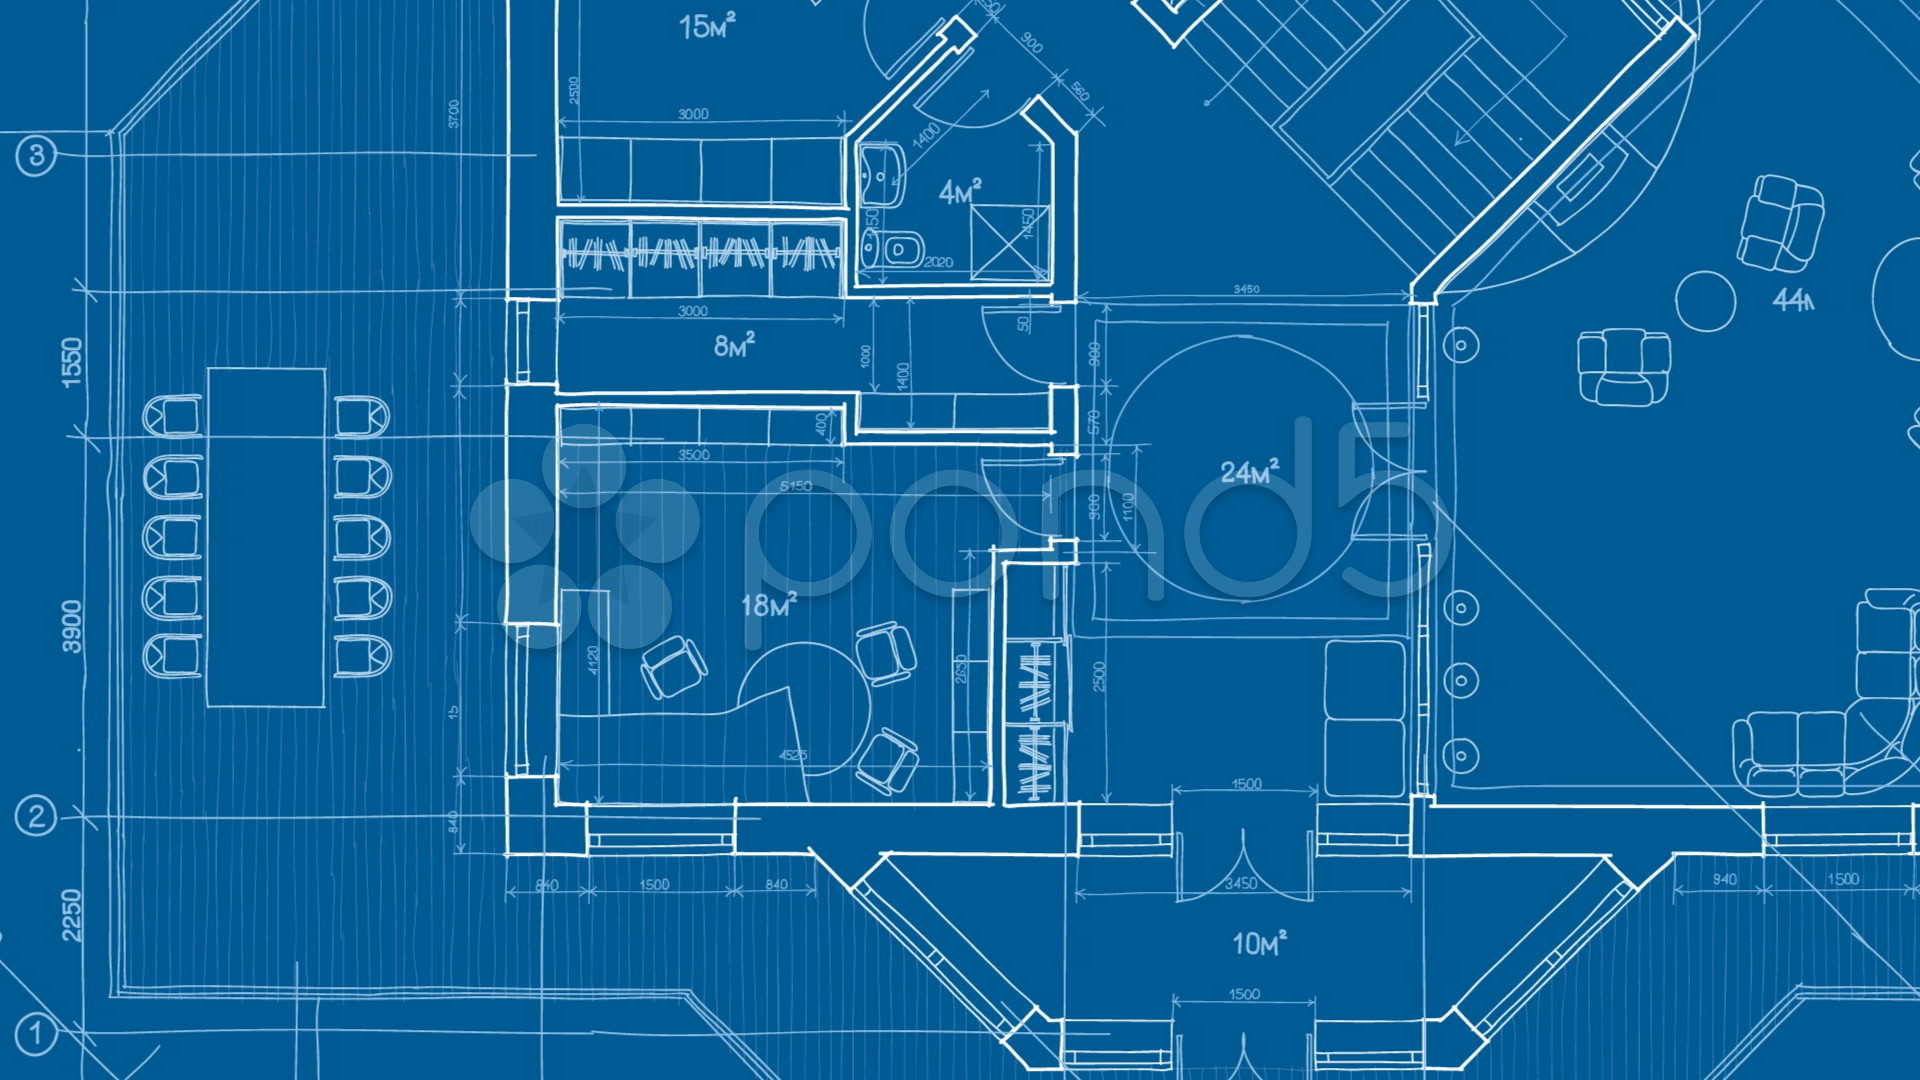 1920x1080 Displaying 10 Images For House Blueprint Wallpaper 